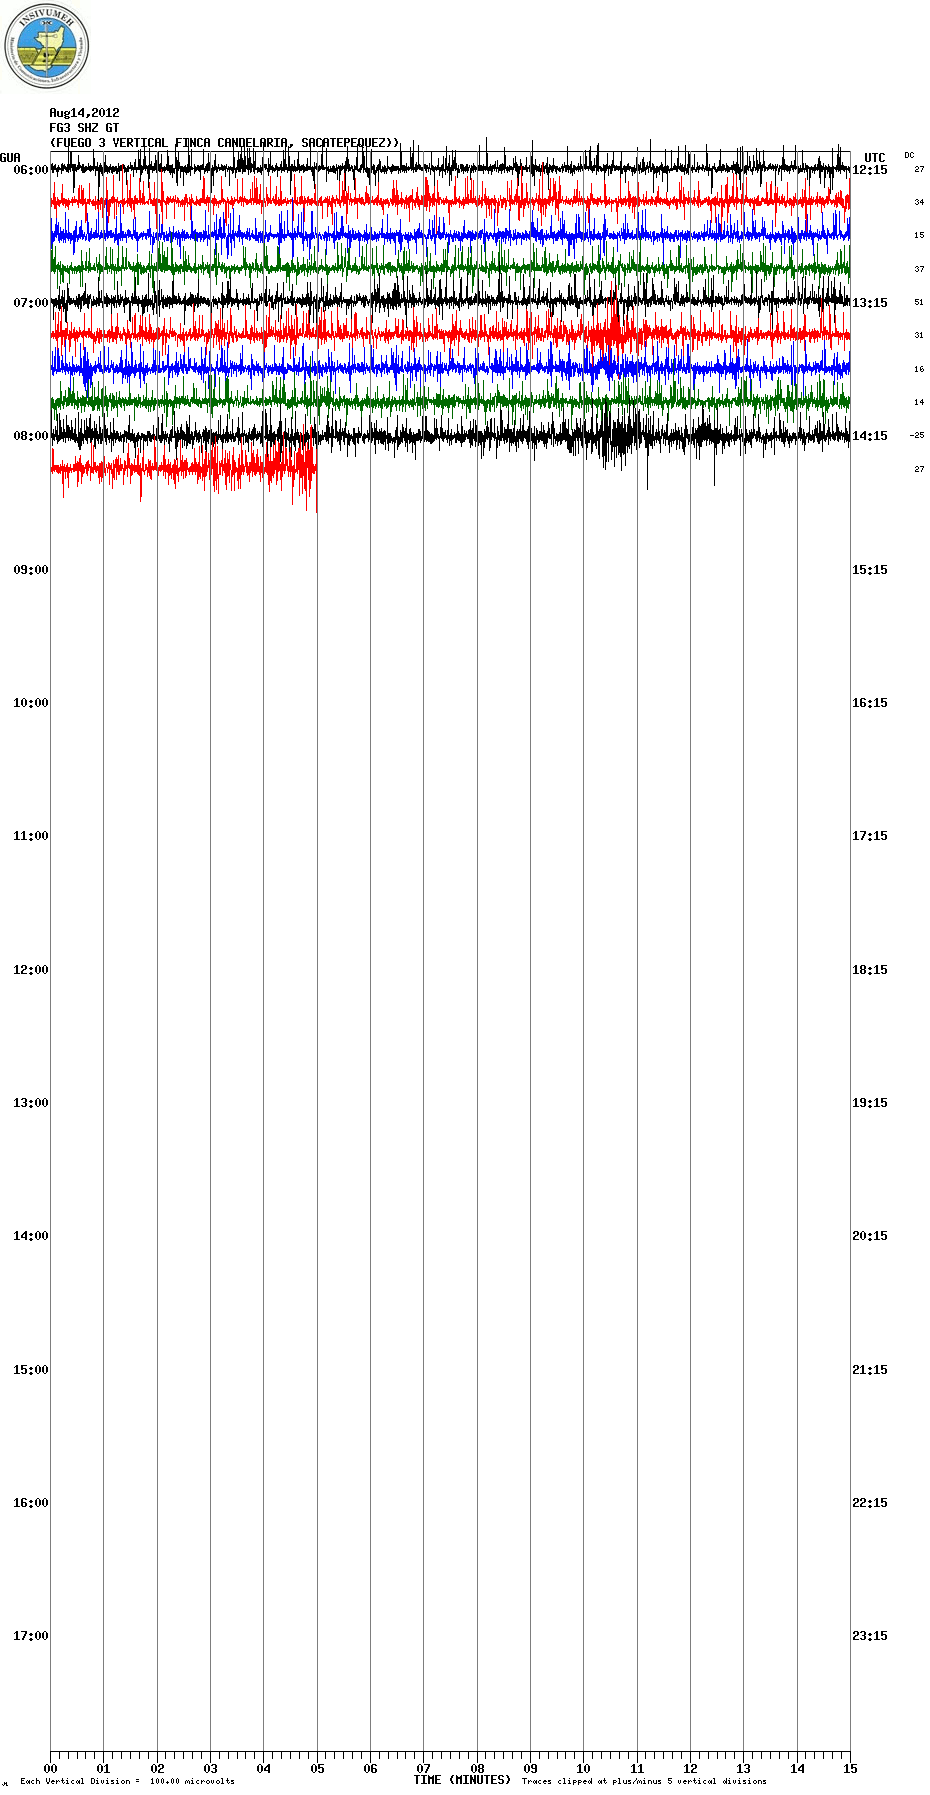 Current seismic signal from Fuego (FG3 station, INSIVUMEH)